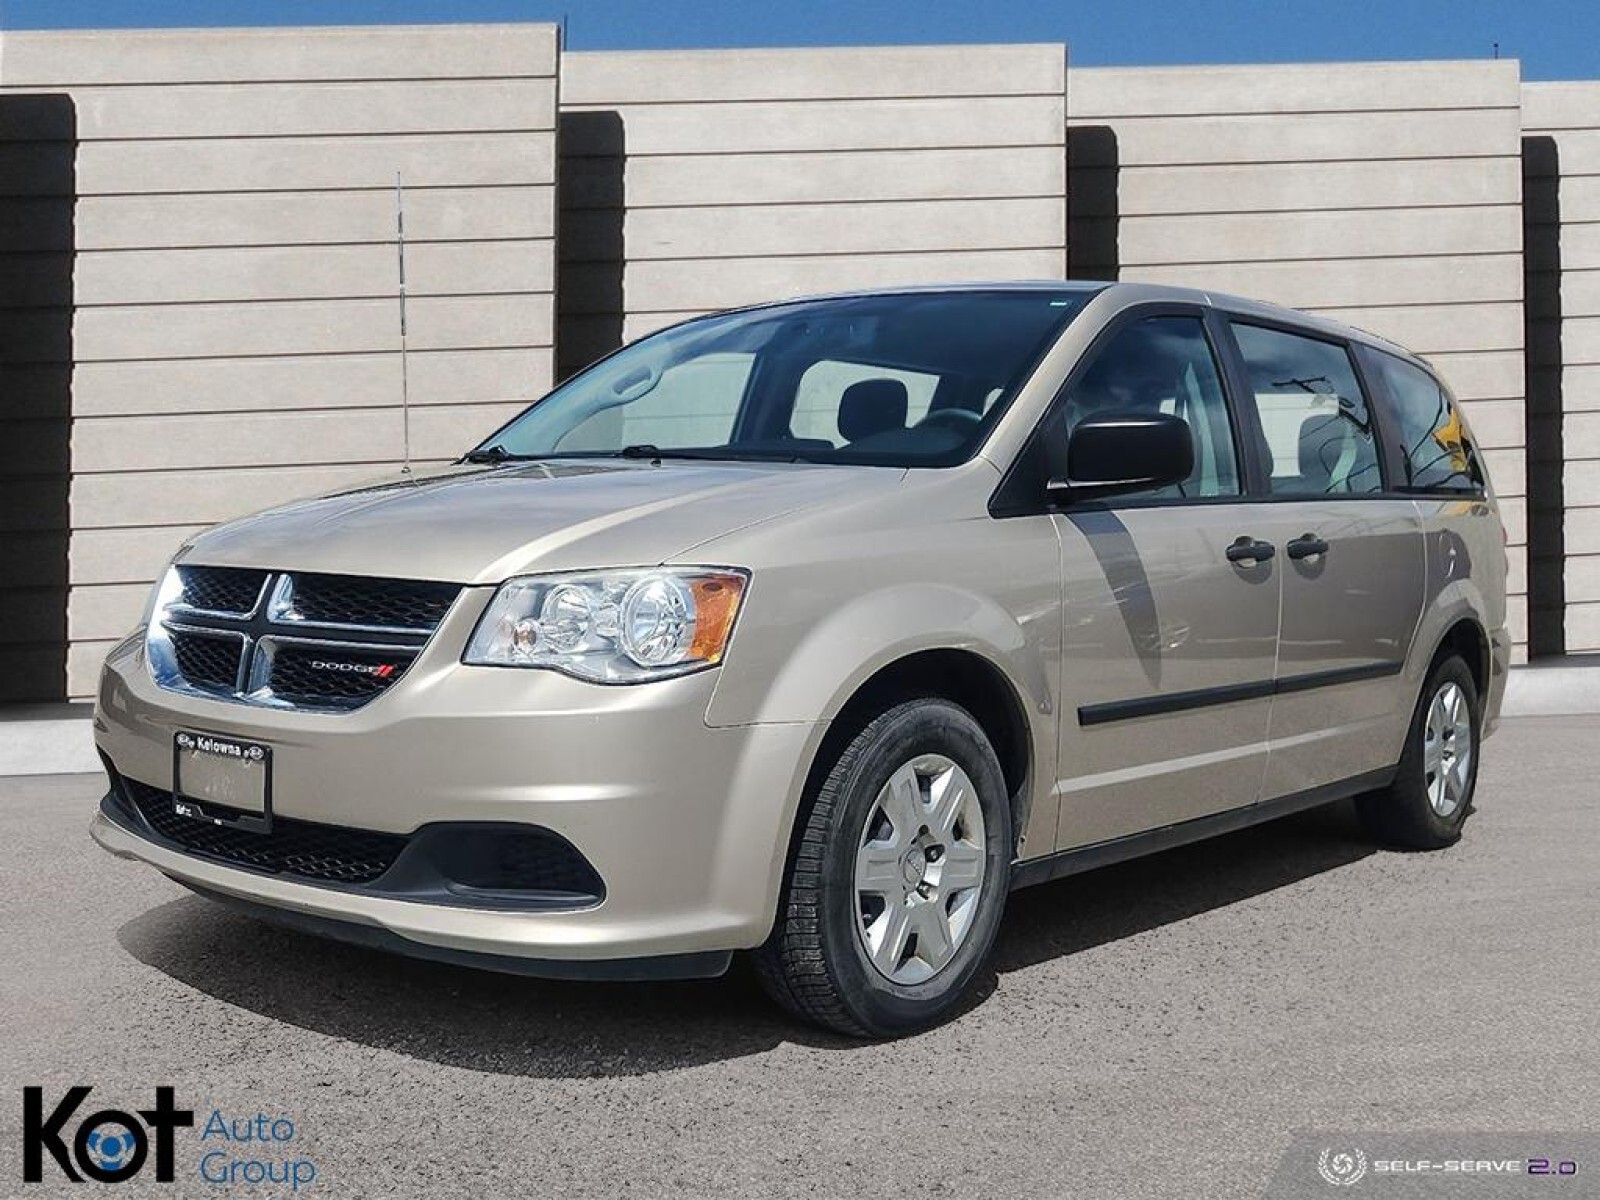 2012 Dodge Grand Caravan SE! GREAT HISTORY! LOCALLY OWNED & SERVICED! NO AC